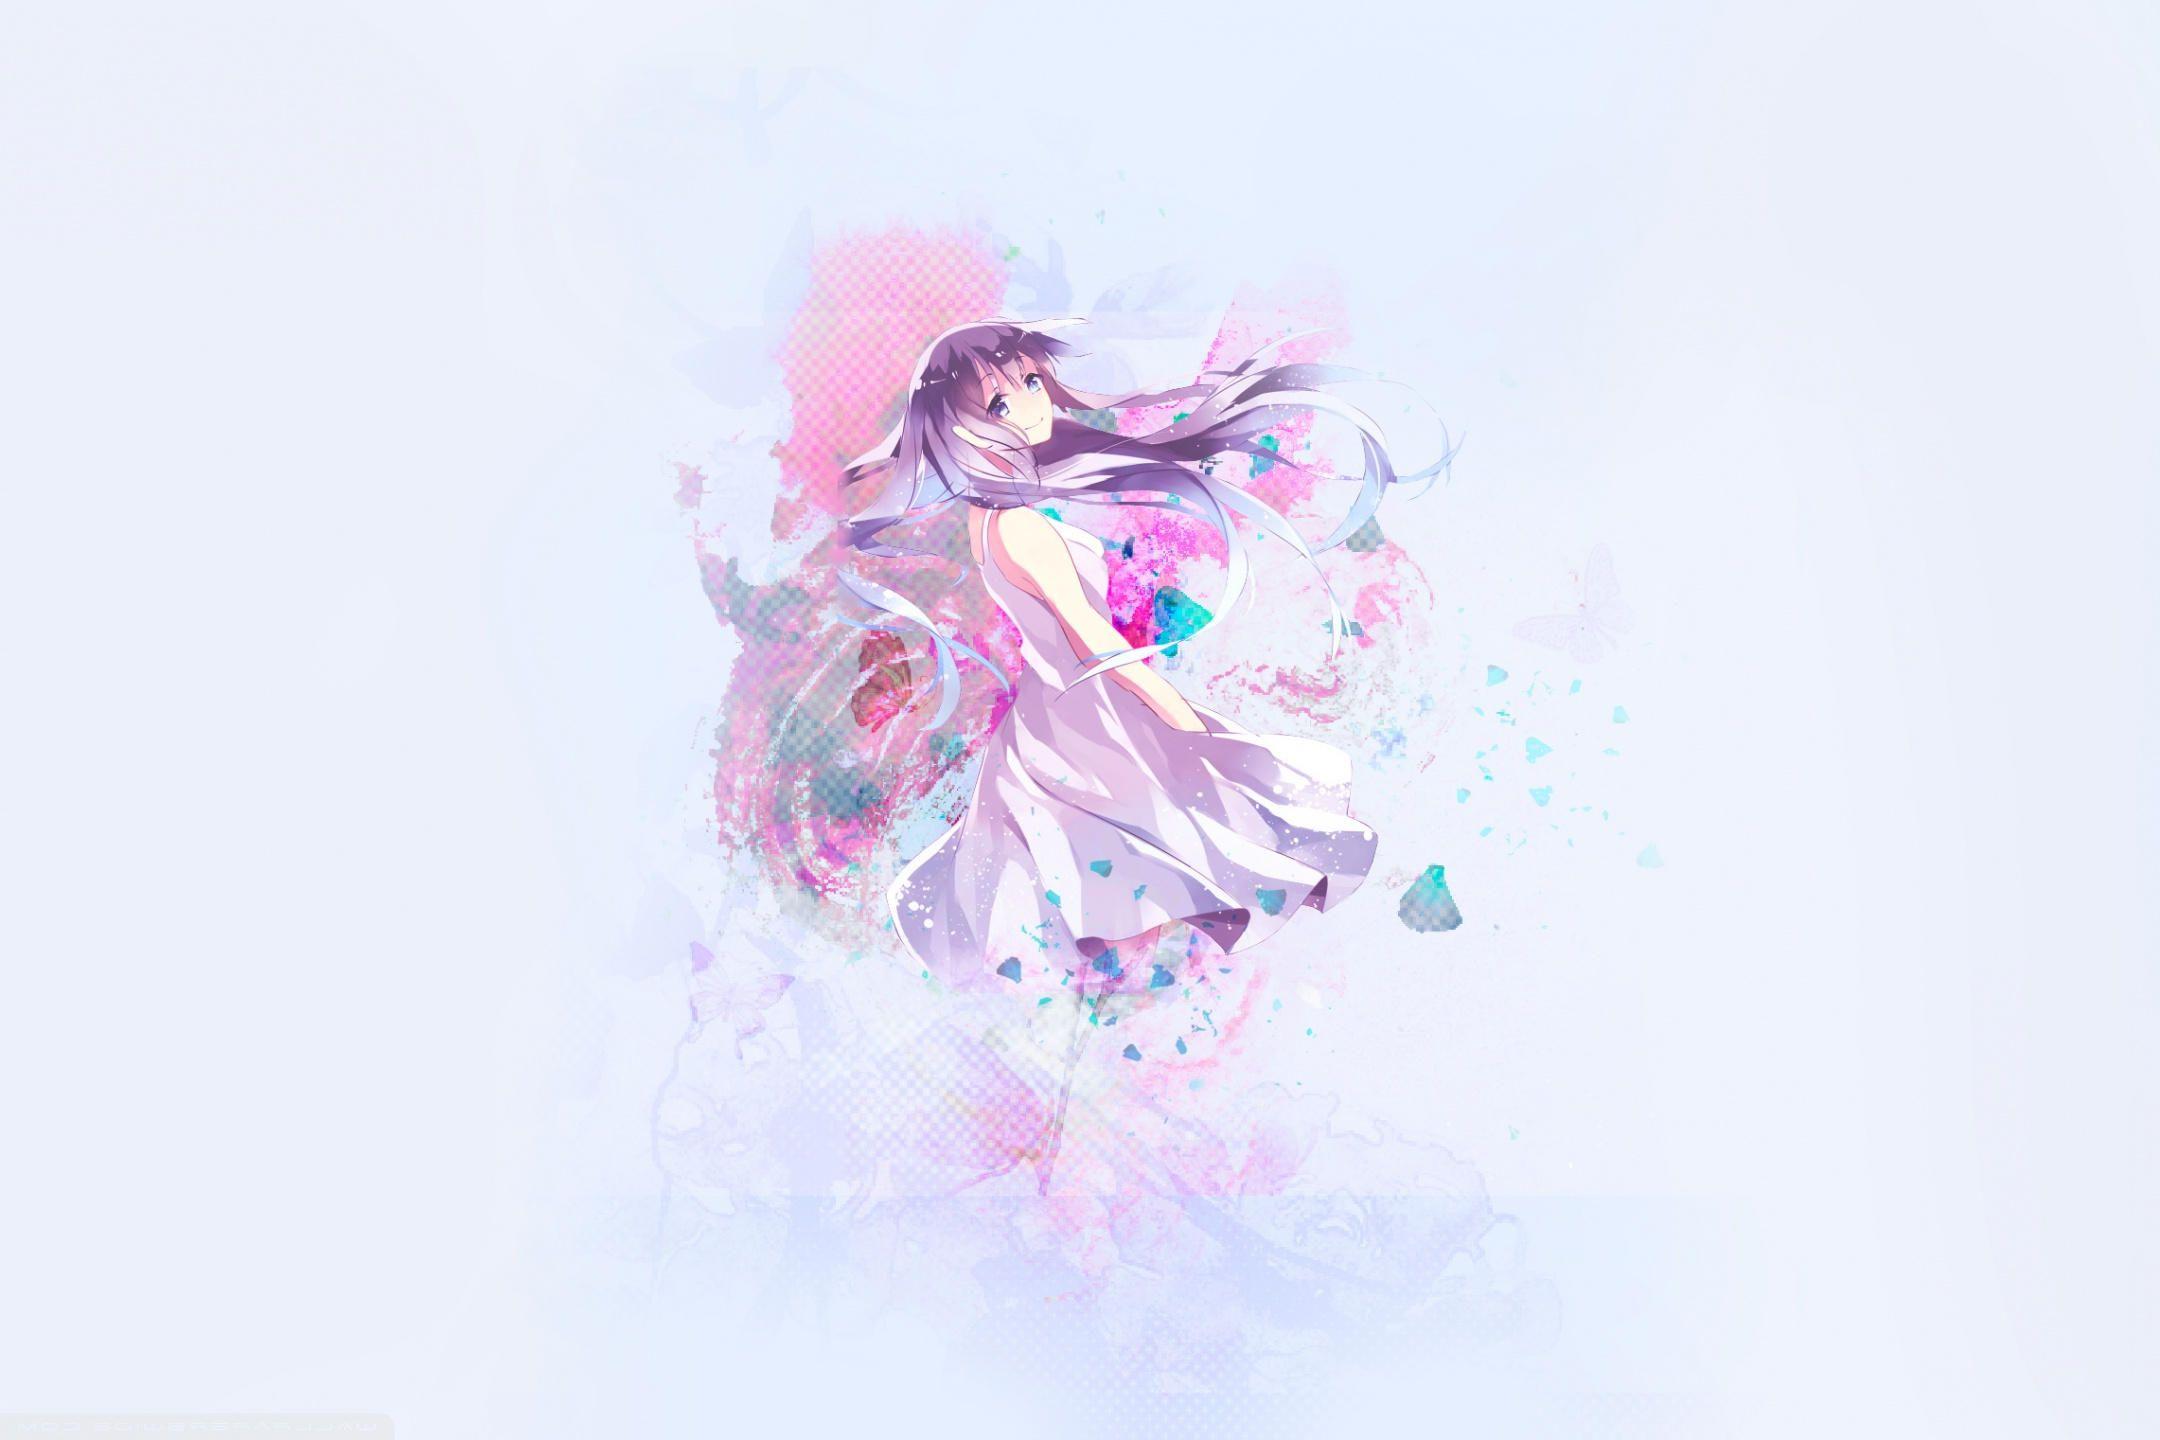 Page 15 | Aesthetic Anime Wallpaper Images - Free Download on Freepik